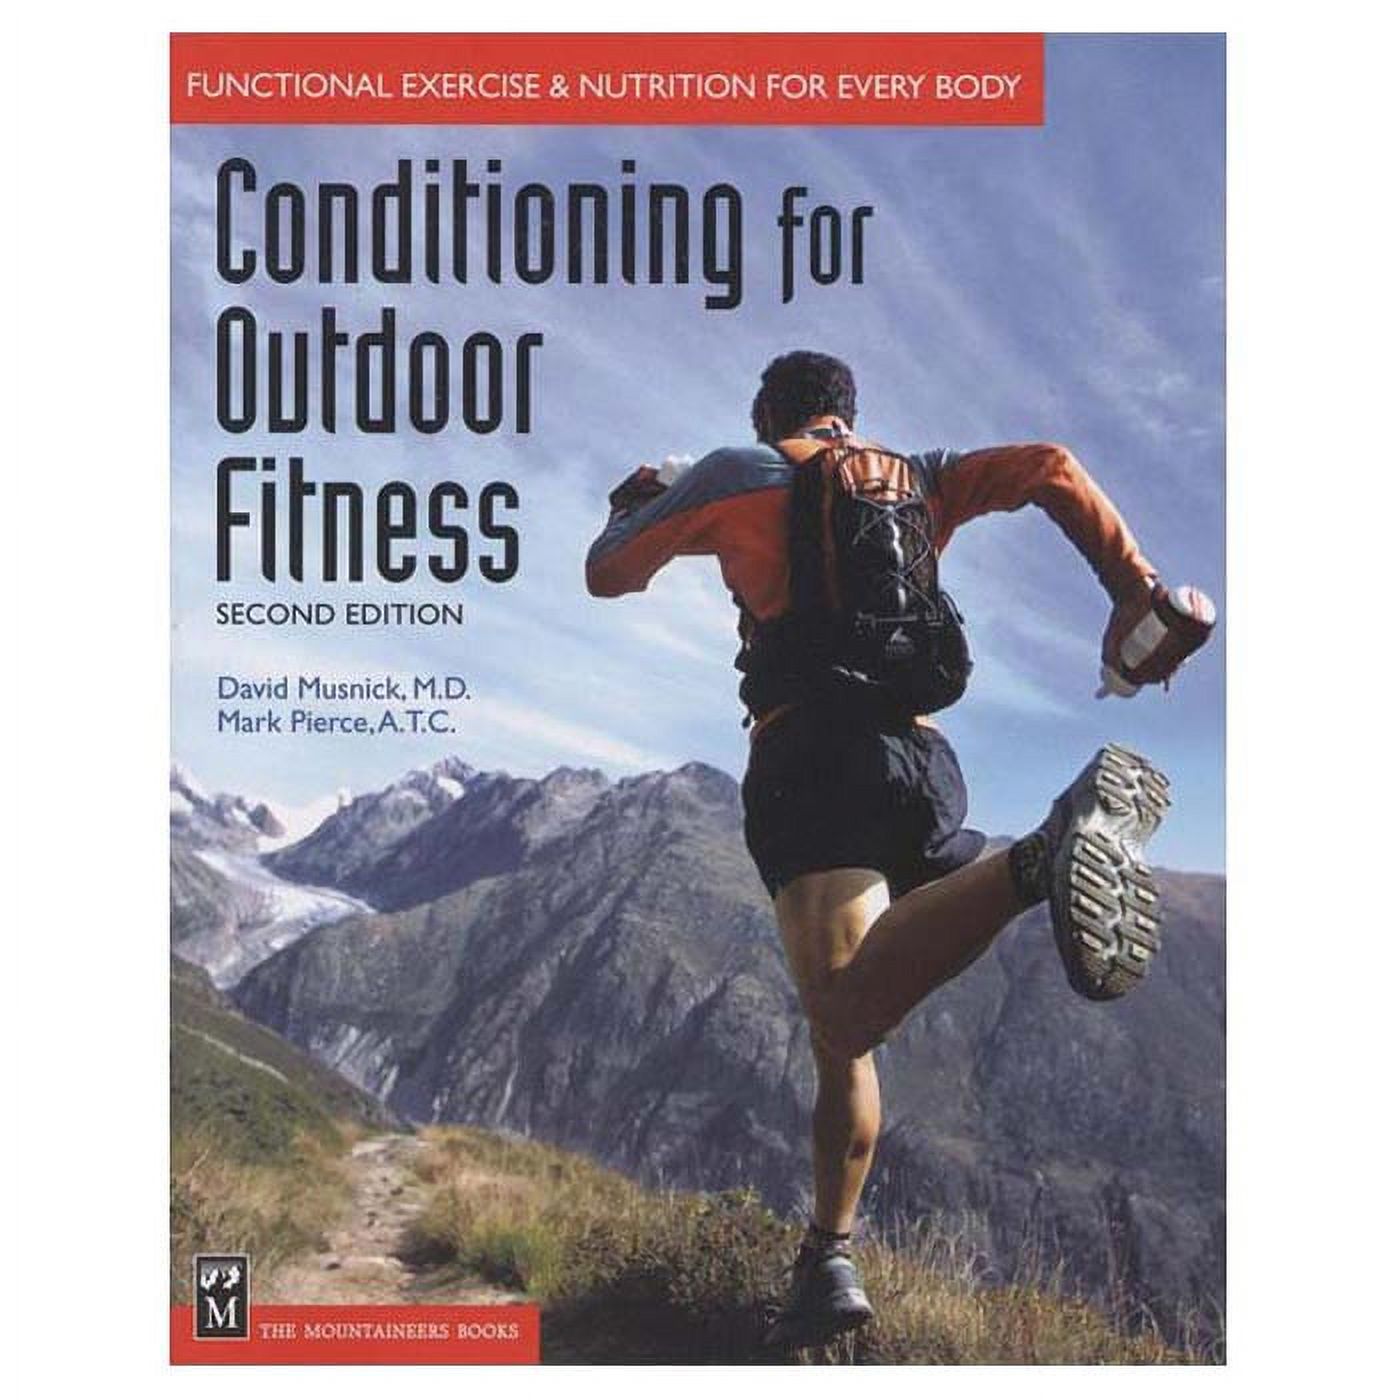 Ultimate Guide to Trail Running: Everything You Need To Know About Equipment * Finding Trails * (Paperback) by Adam W Chase, Nancy Hobbs - image 2 of 3